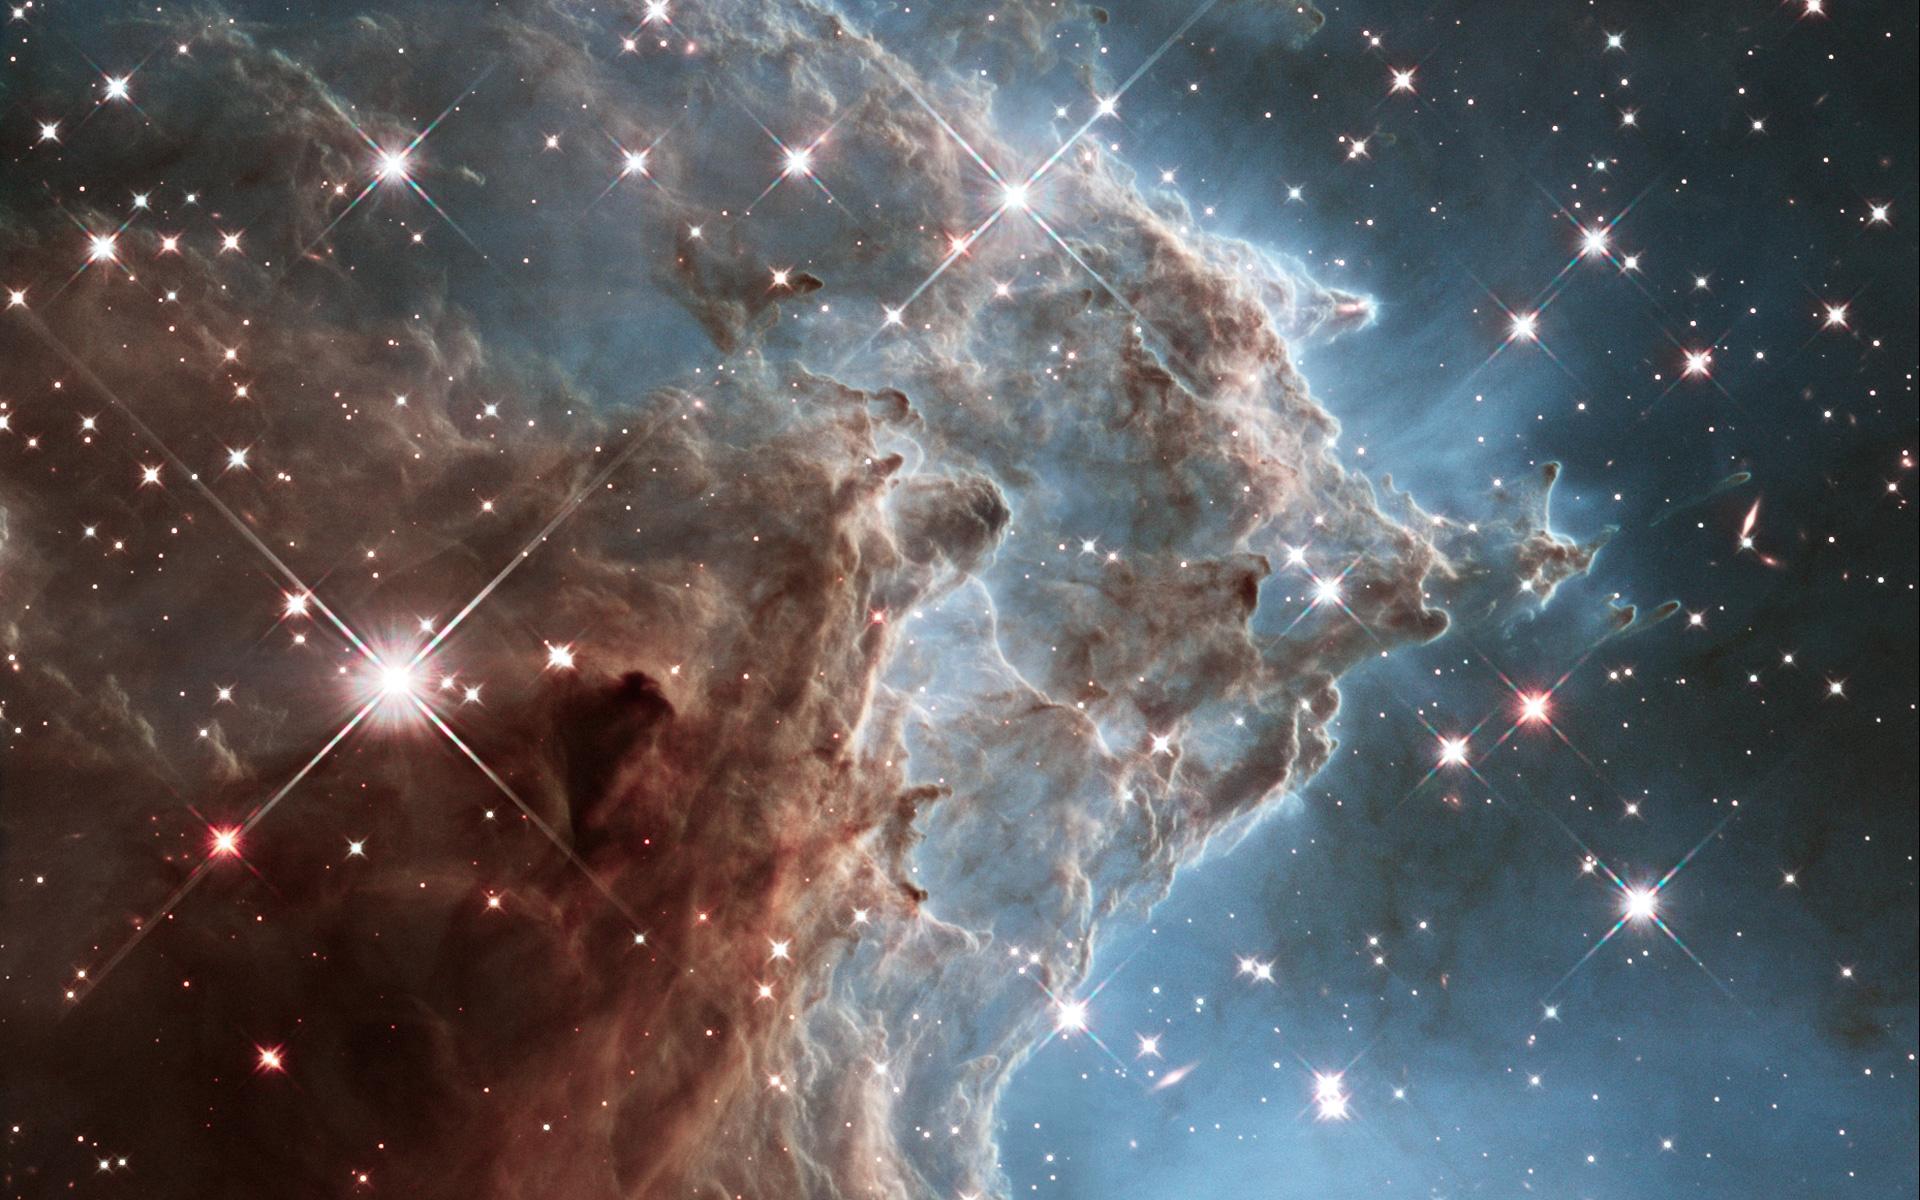 The Best Hubble Space Telescope Image of All Time!